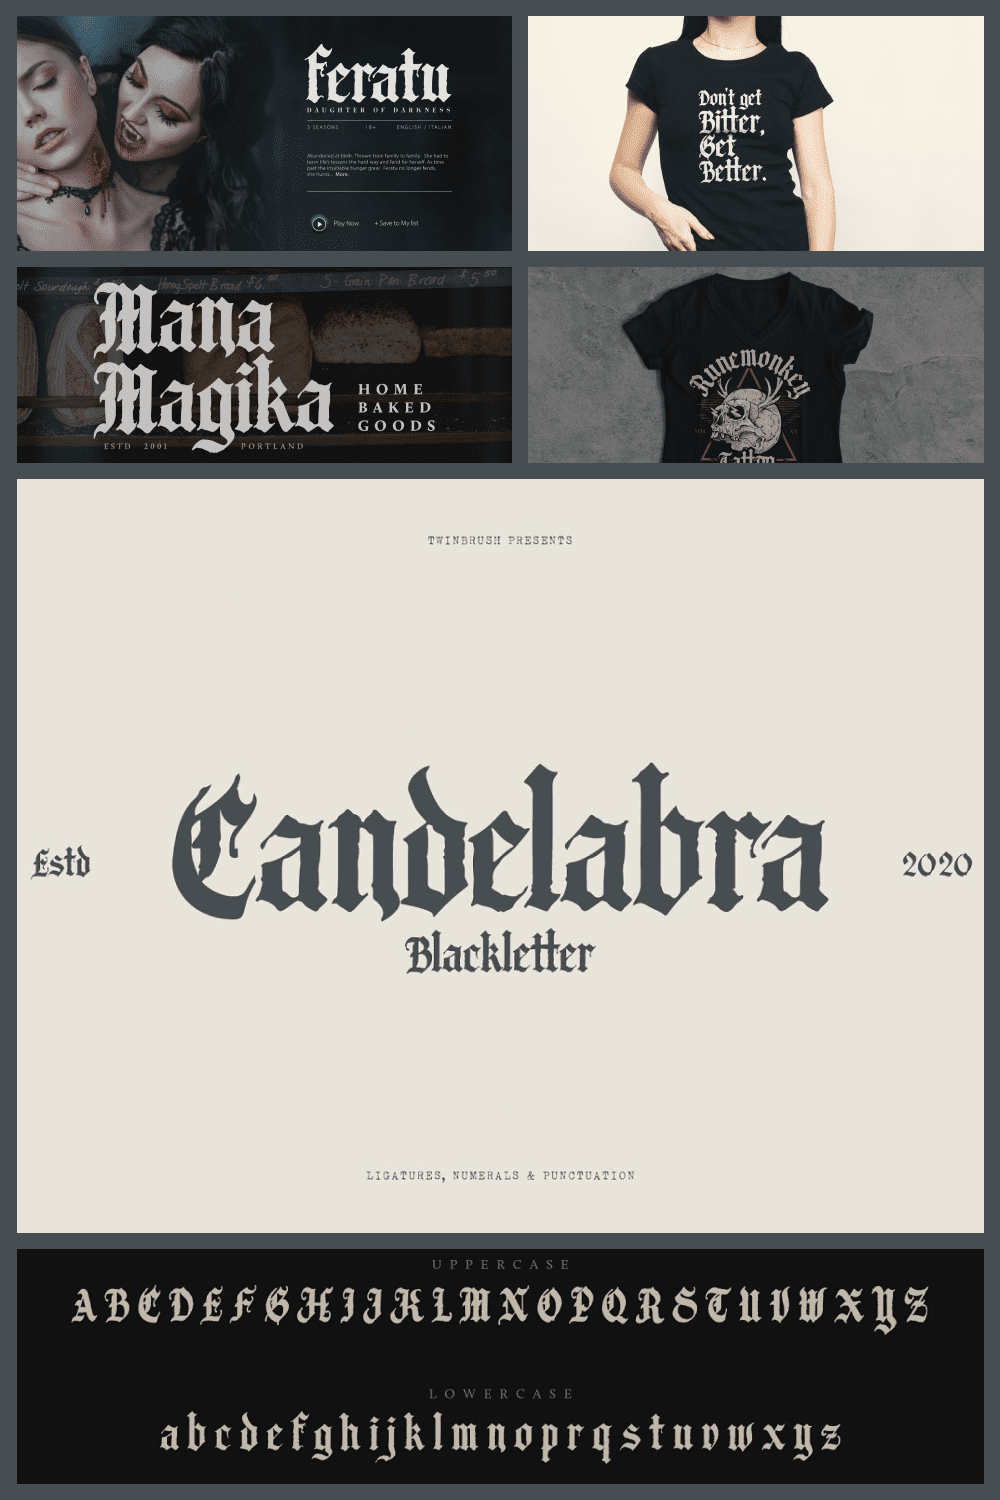 This is a medieval and fantasy inspired blackletter font.